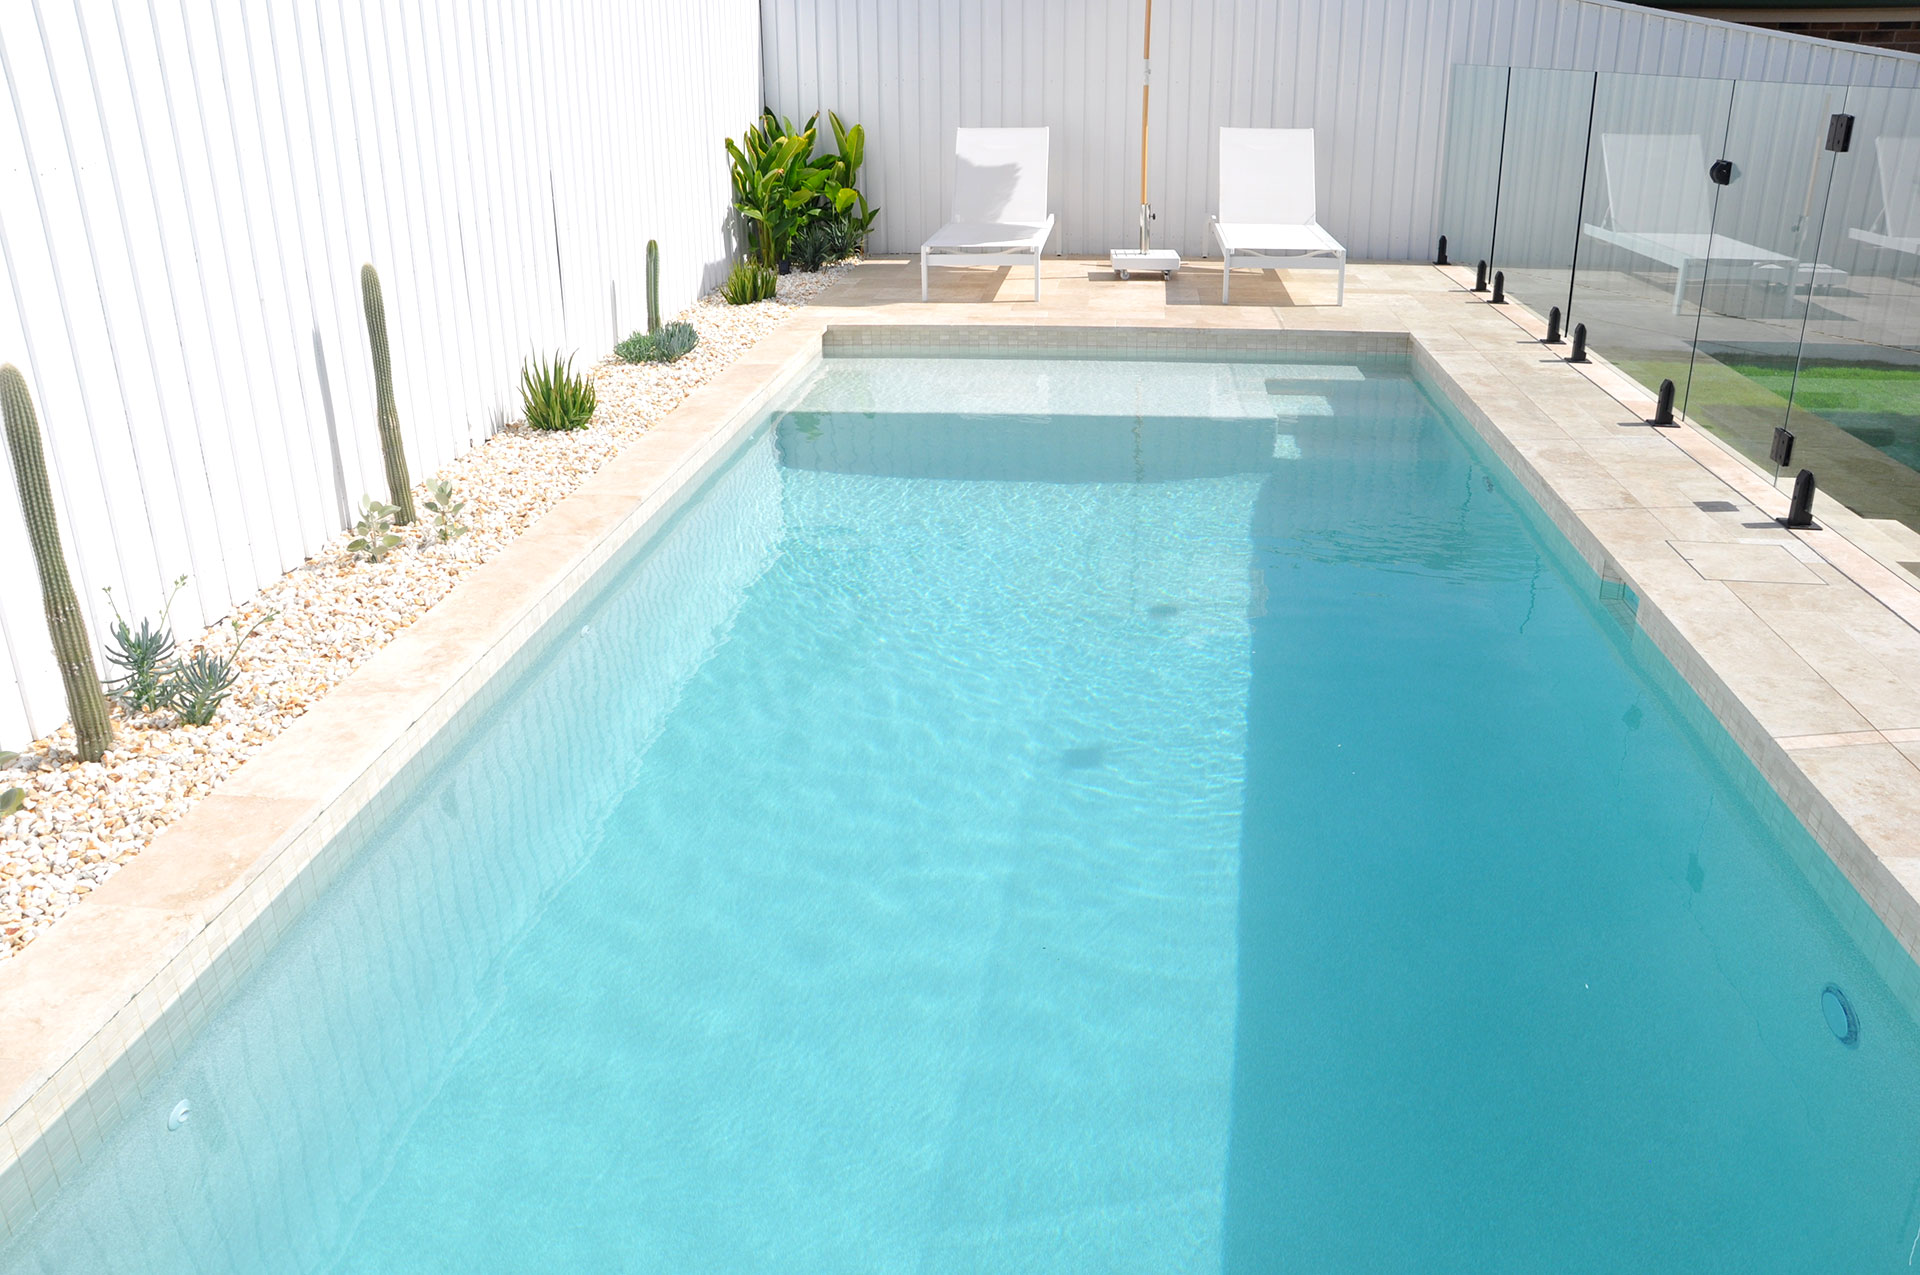 Image of the Latest Trends in Concrete Pool Designs